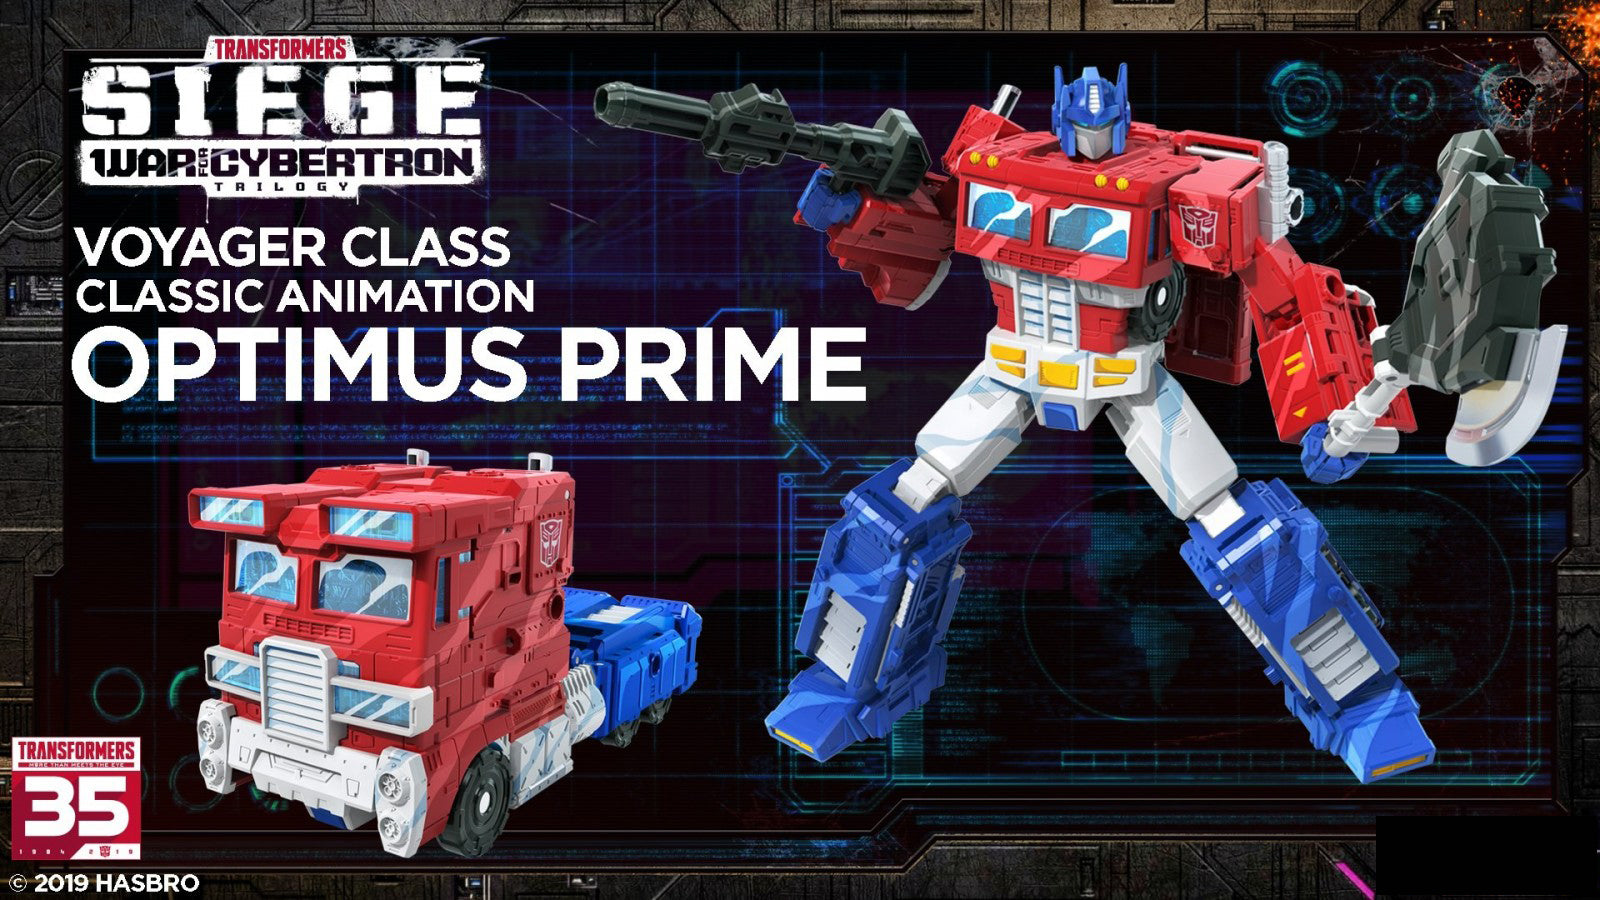 Hasbro - Transfomers Generations - War For Cybertron: Siege - Voyager - Optimus Prime (Classic Animation) - Marvelous Toys